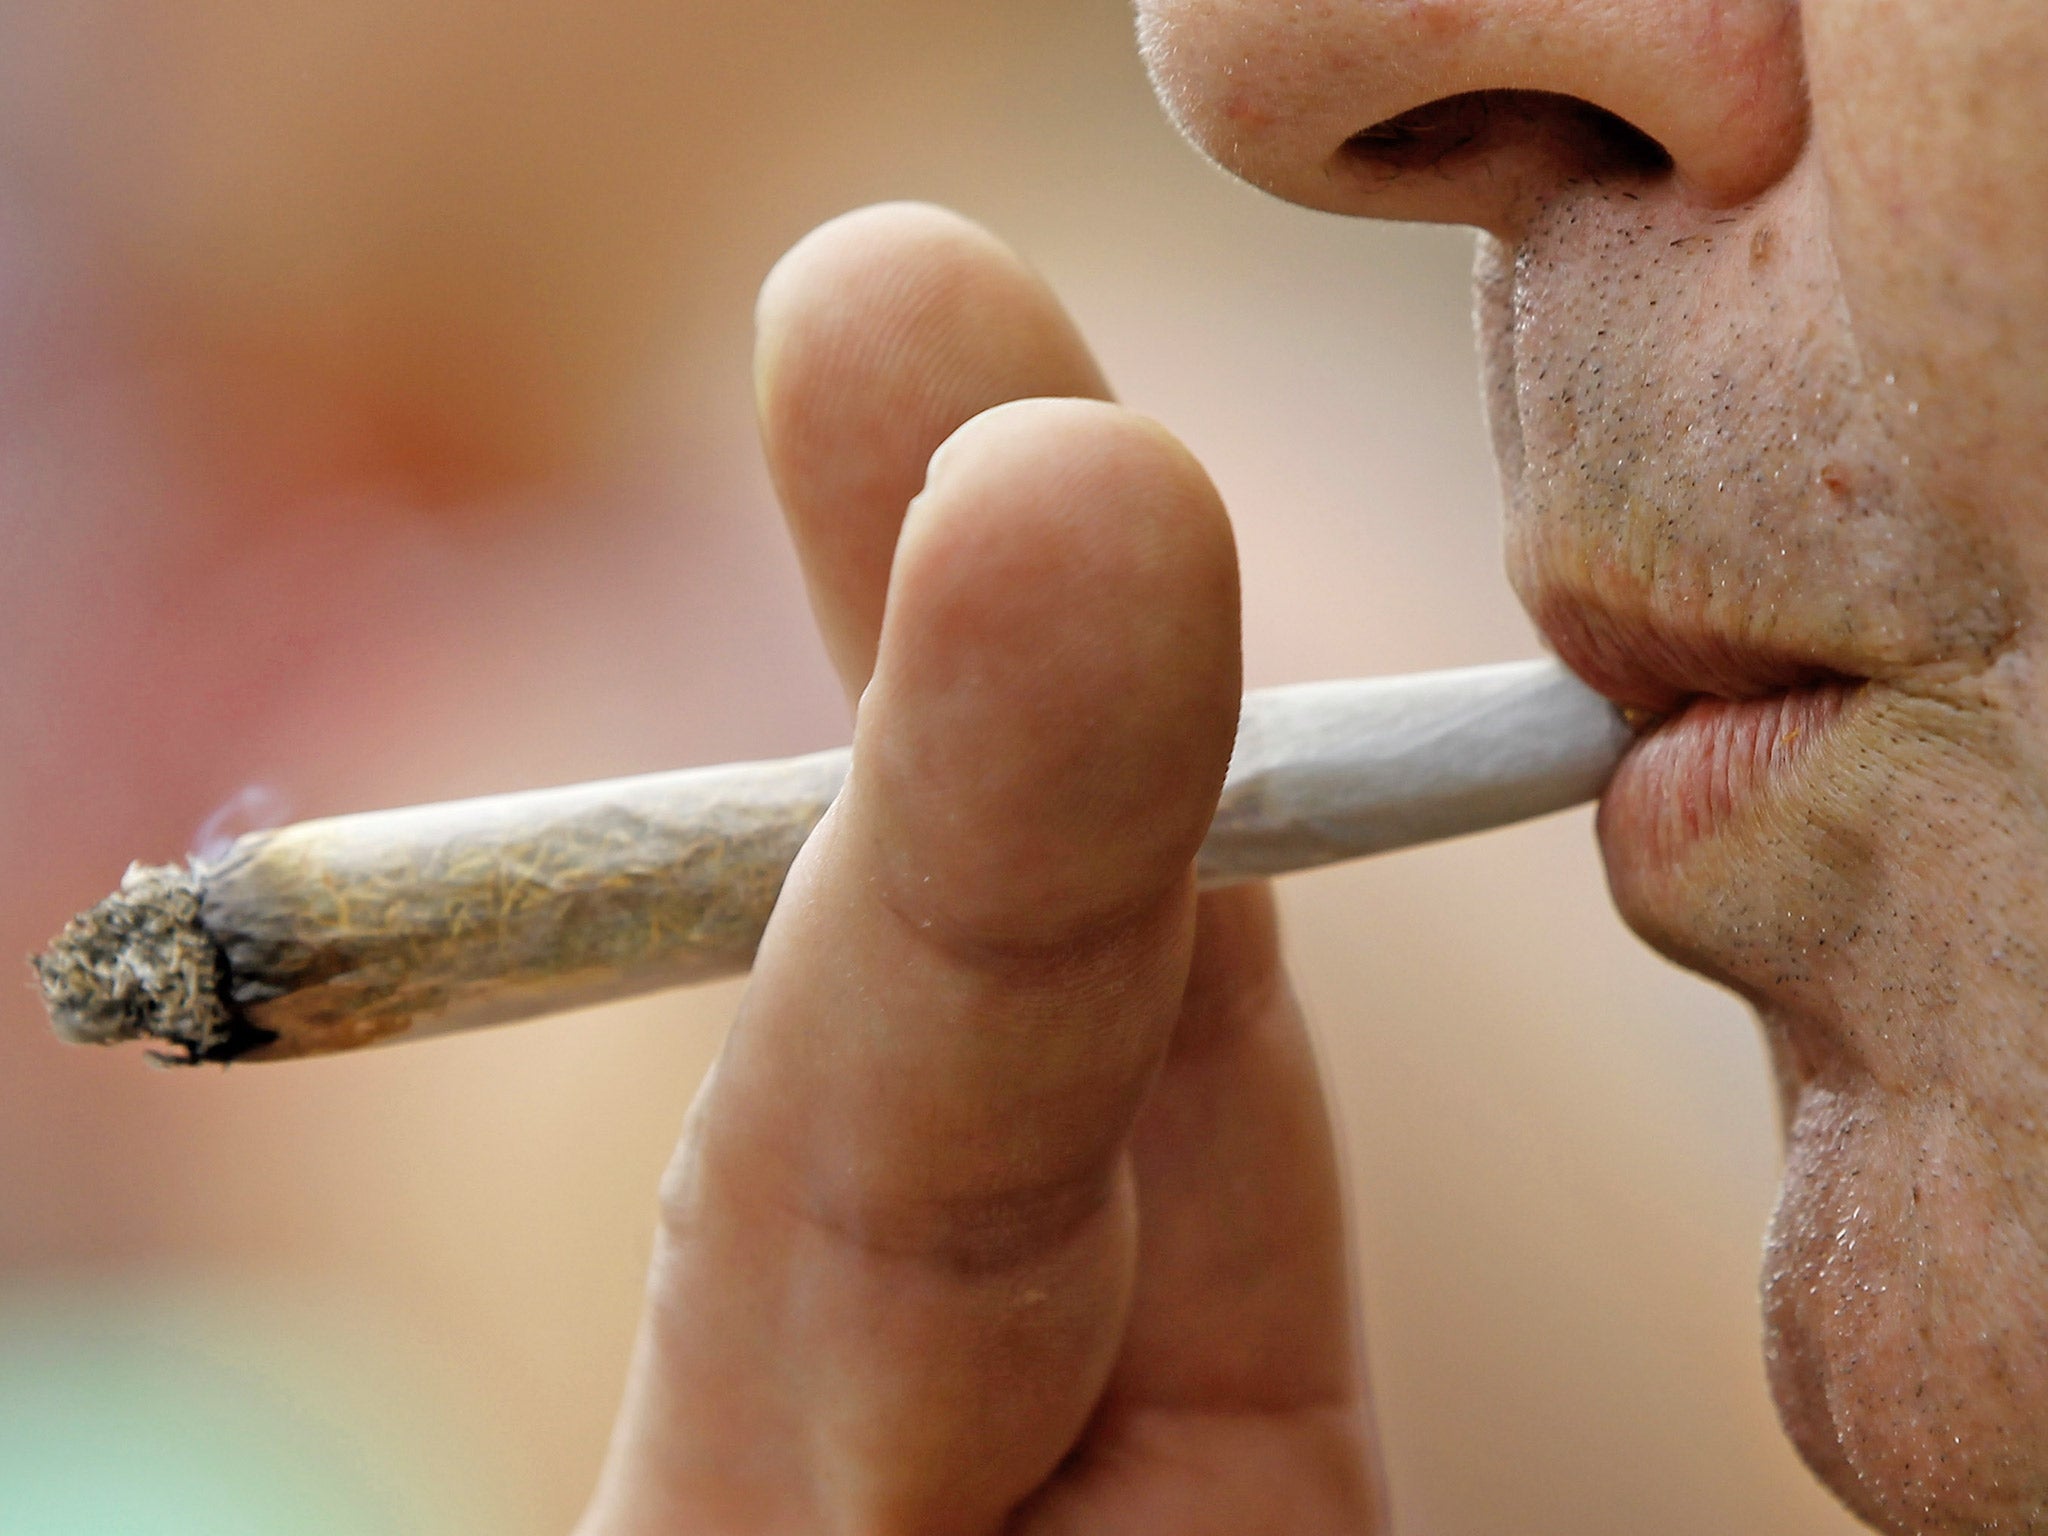 A Fiat worker was sacked for smoking cannabis in his lunch break